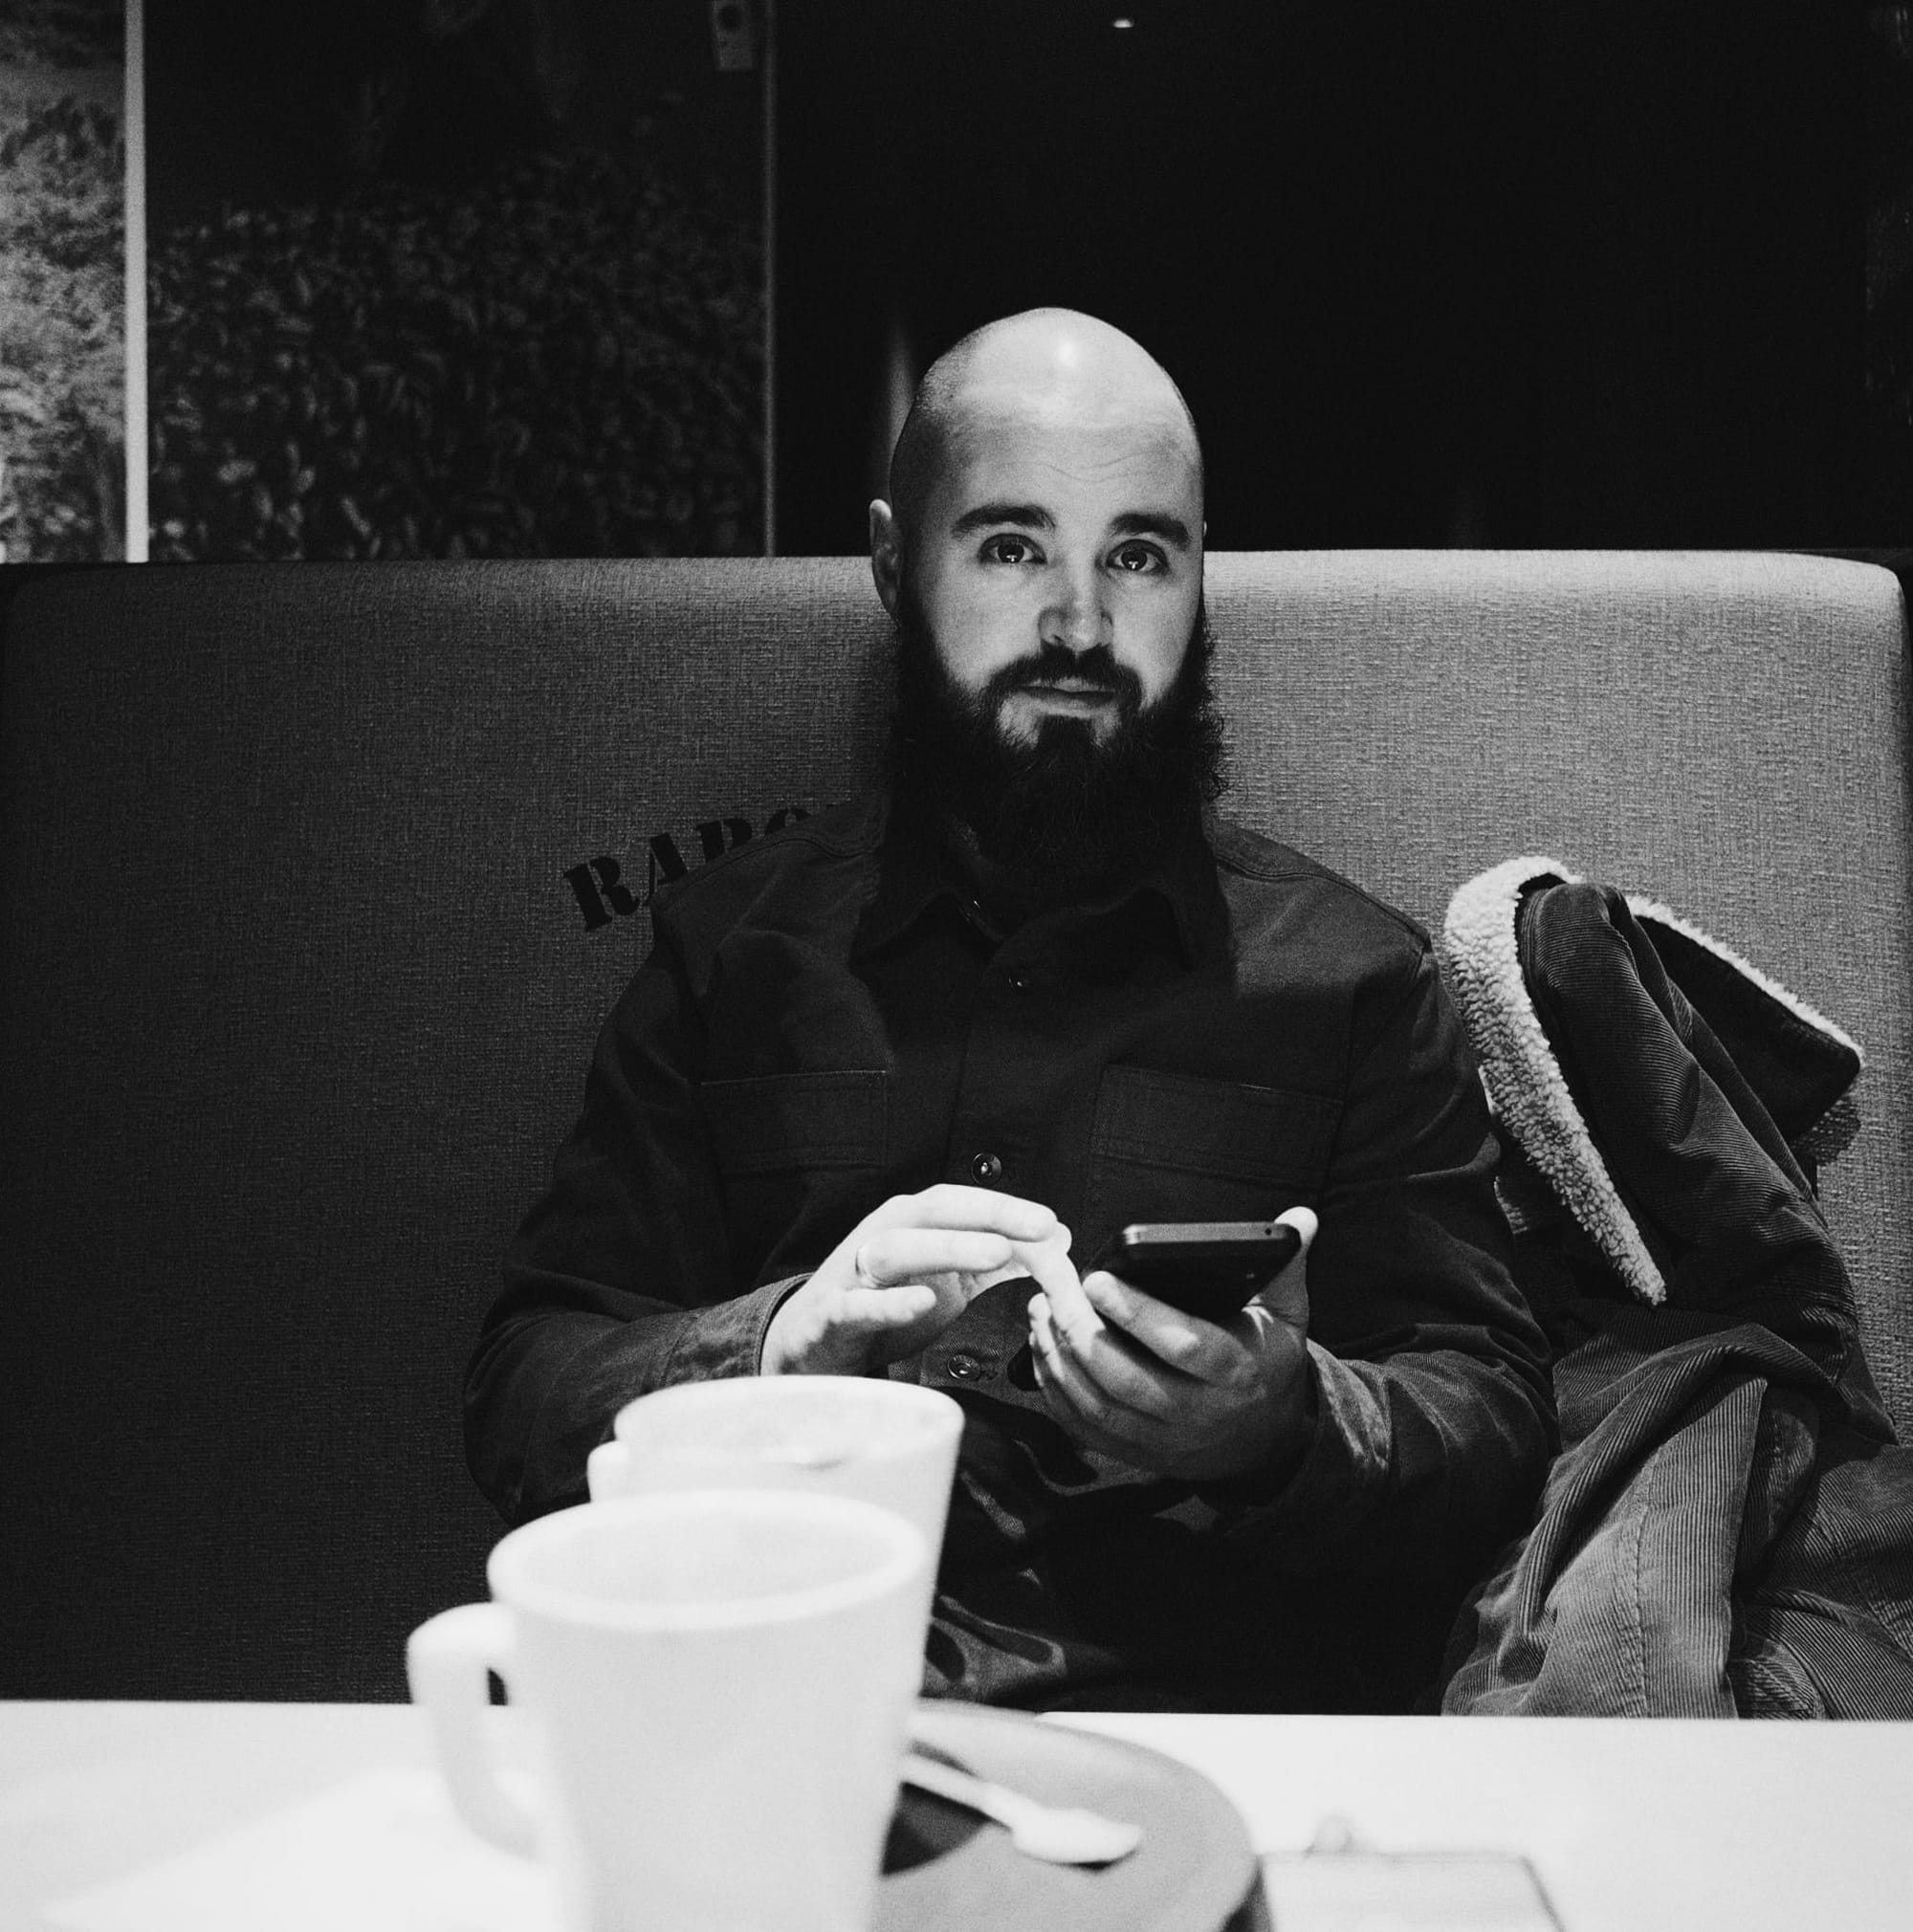 Bald man with big beard Ben Craske in a cafe with a hot chocolate